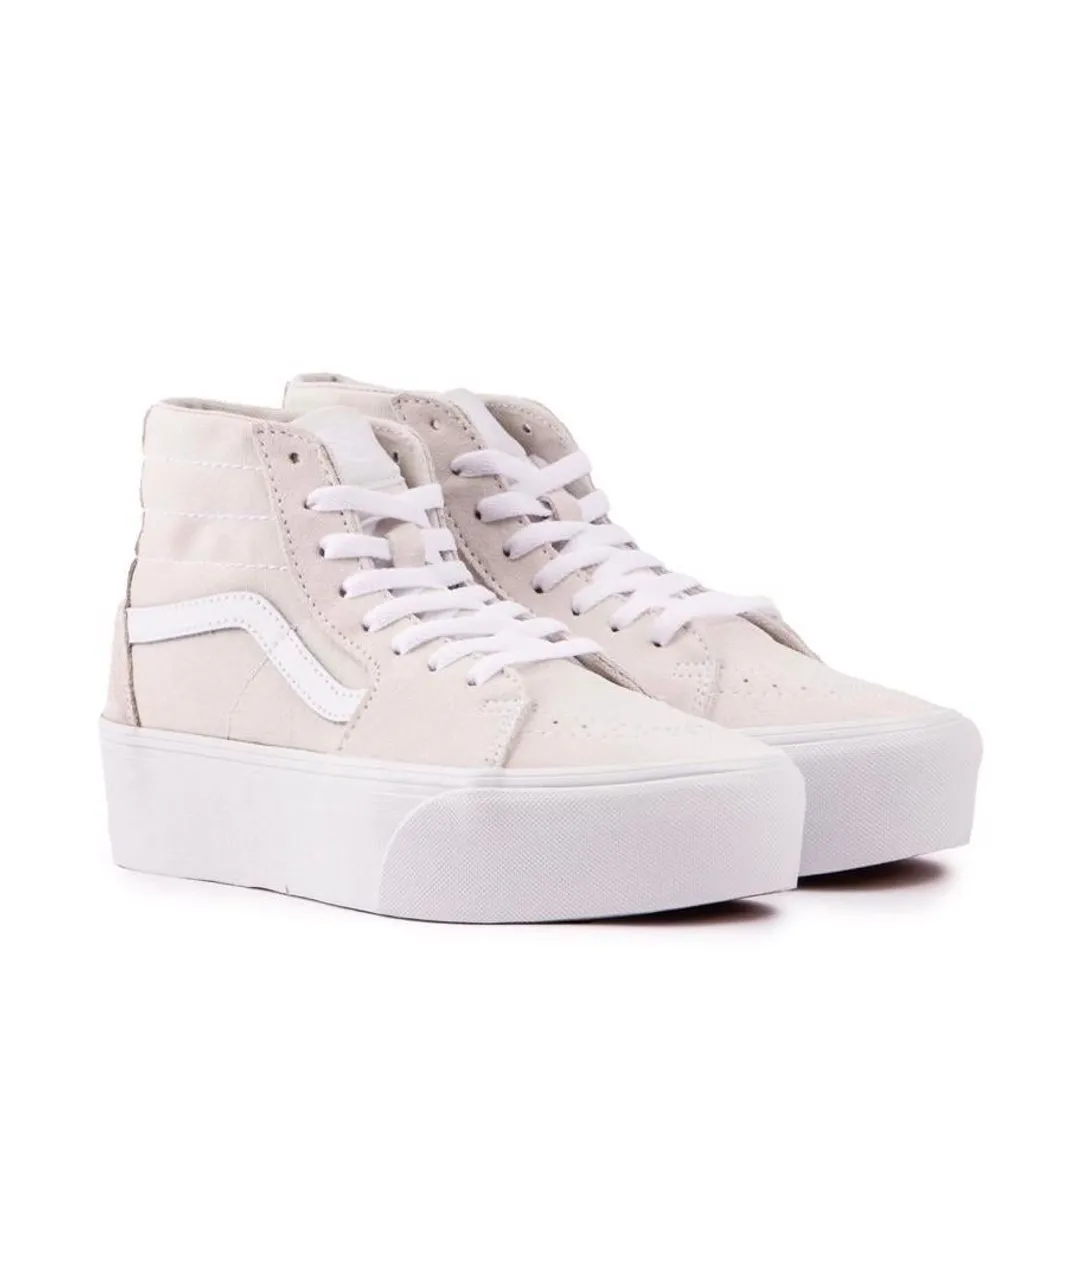 Vans Womens Sk8-hi Stacked Trainers - Taupe